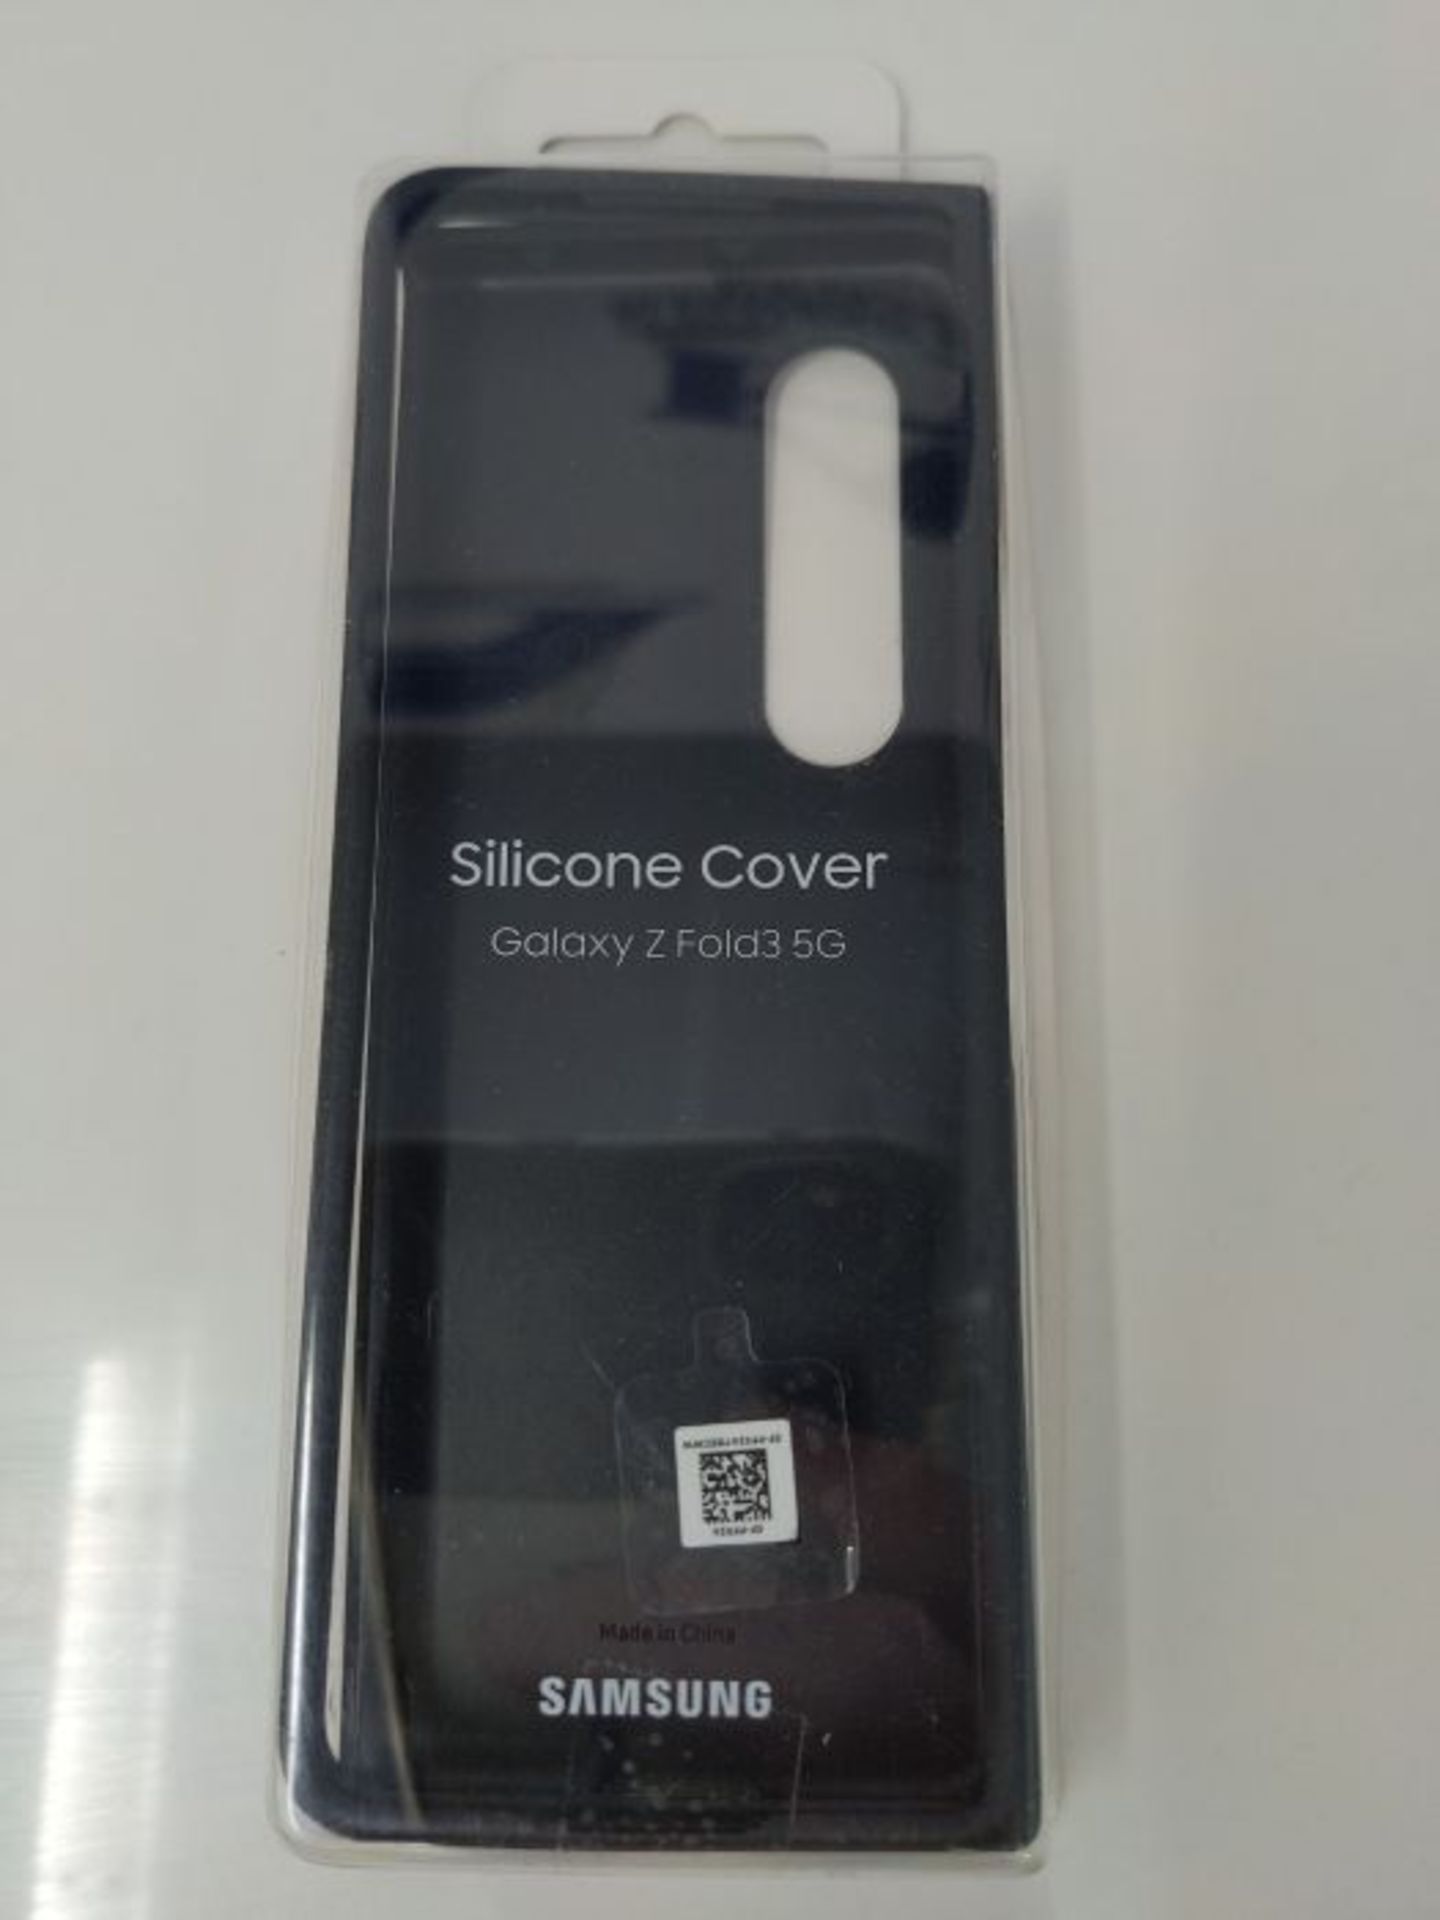 Samsung Silicone Cover Green - Image 2 of 2